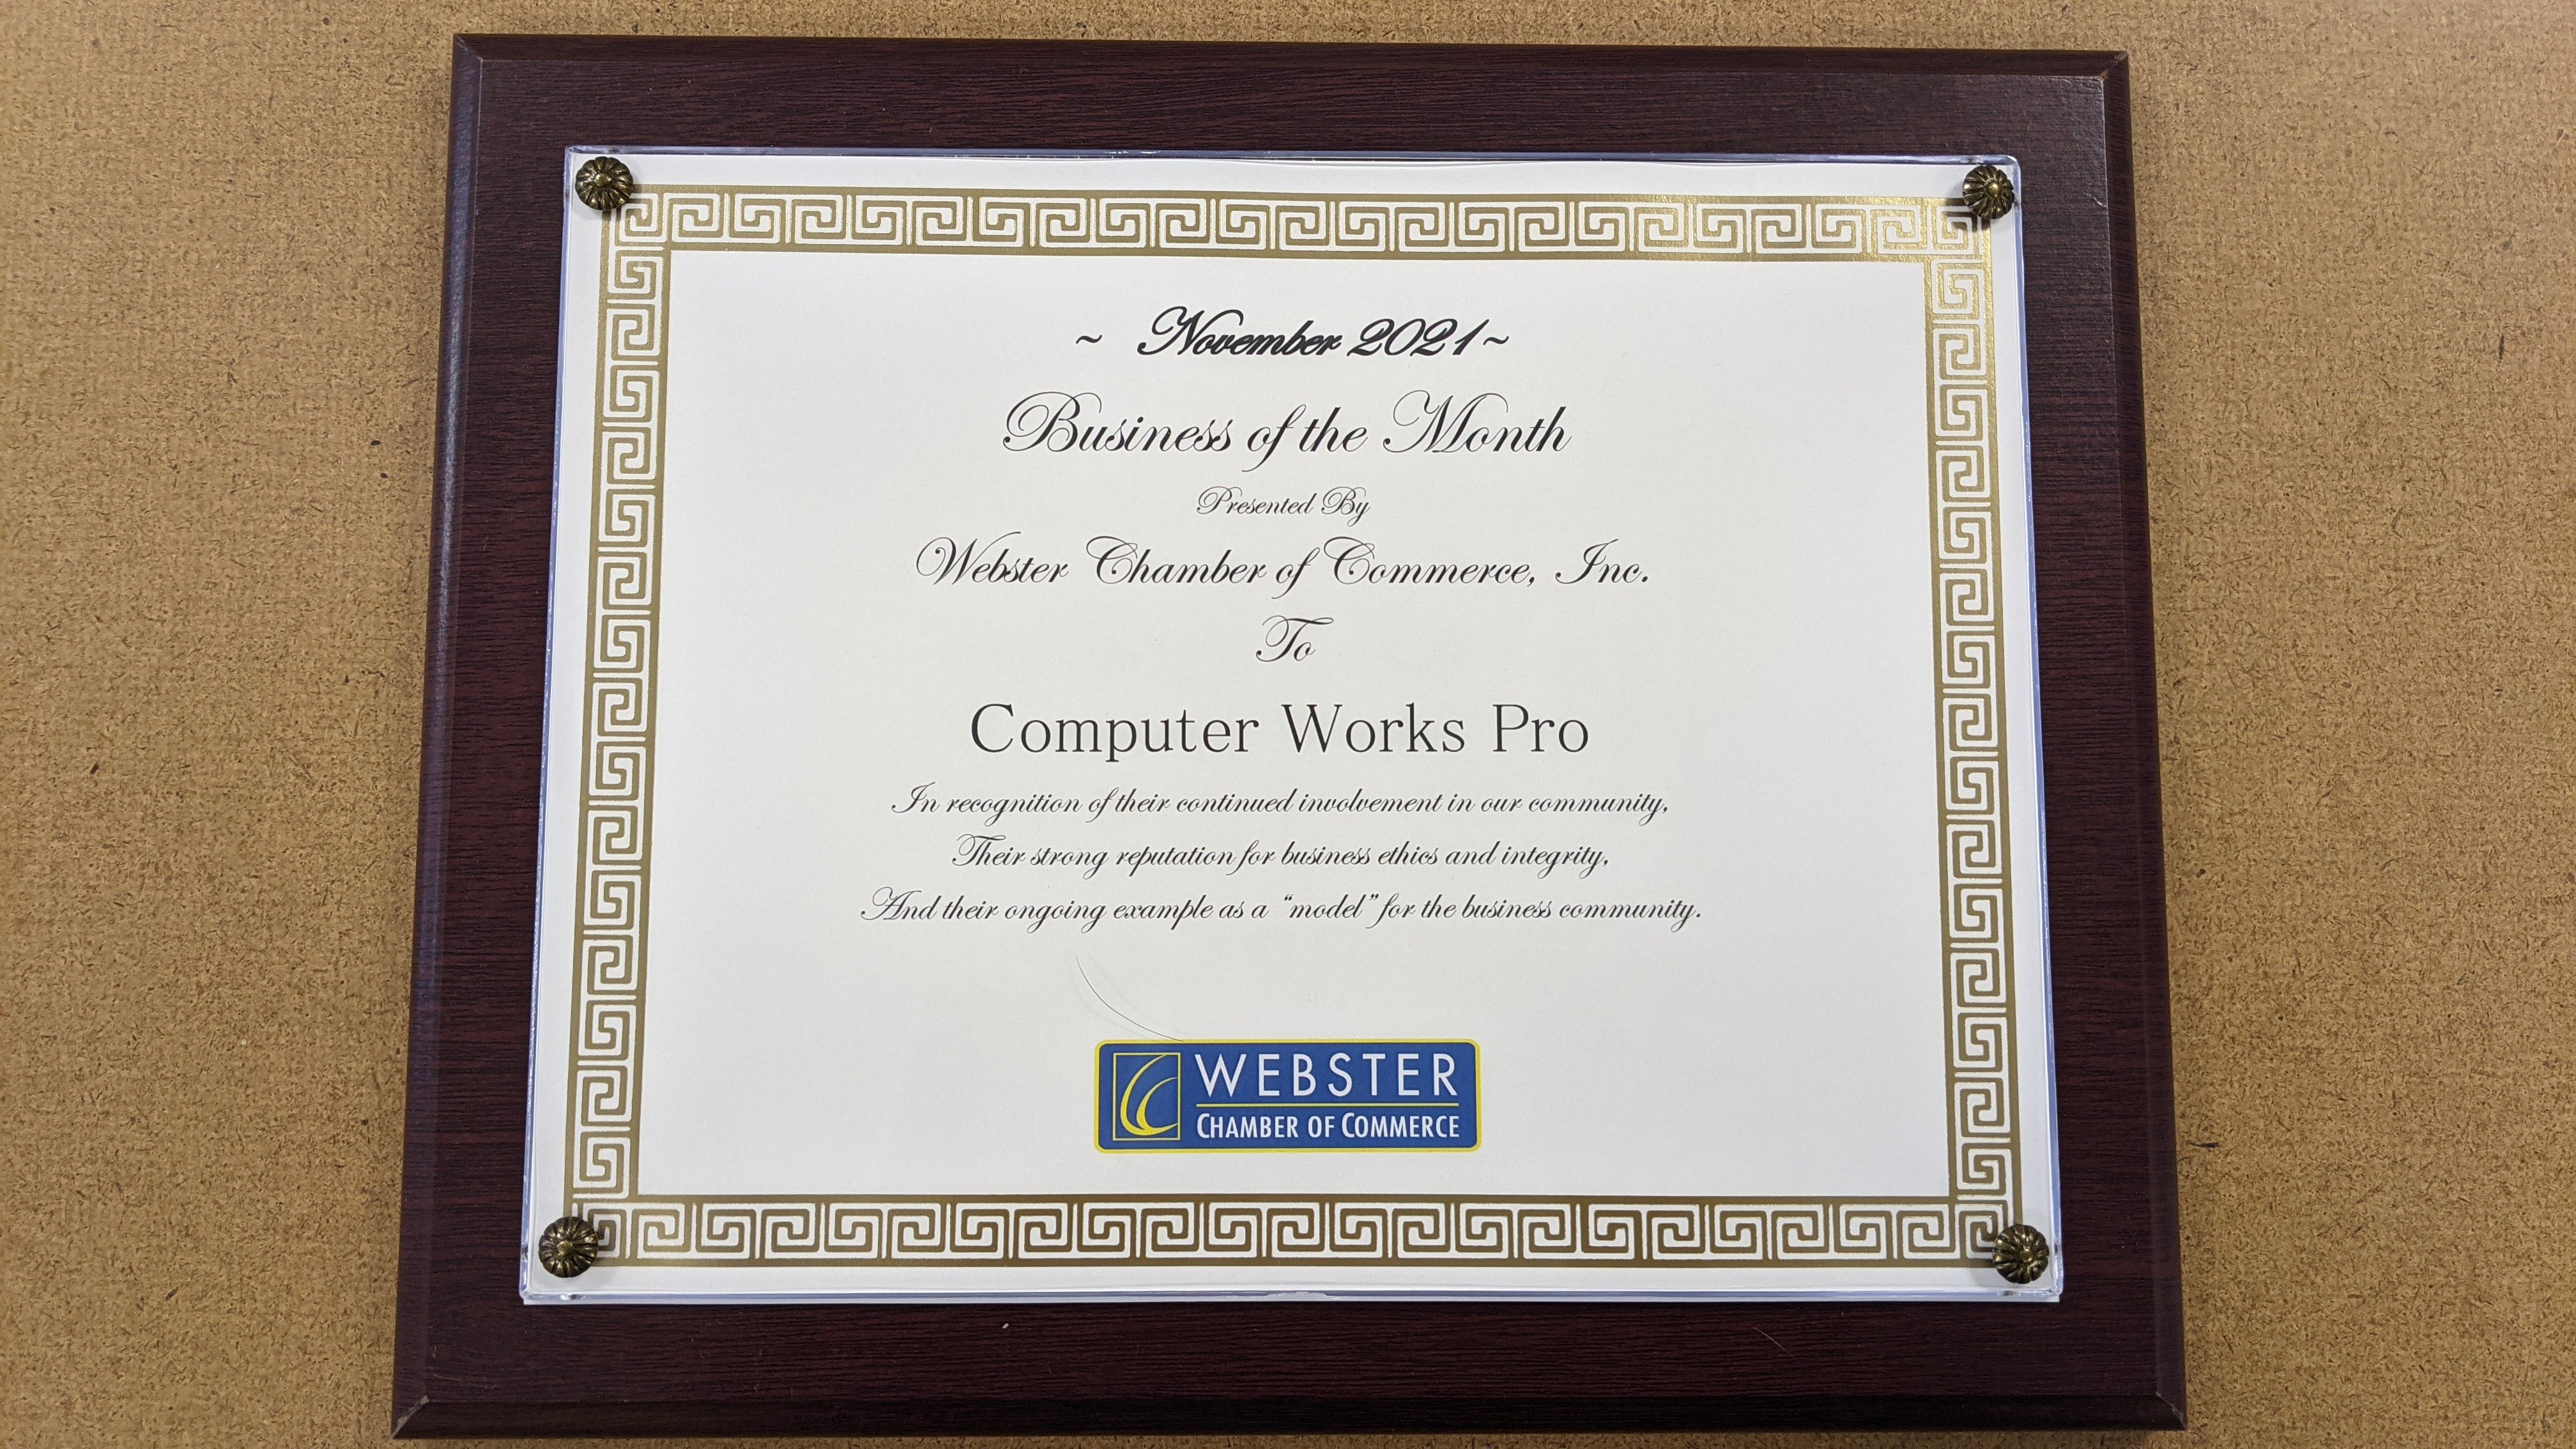 Certificate for Business of the month